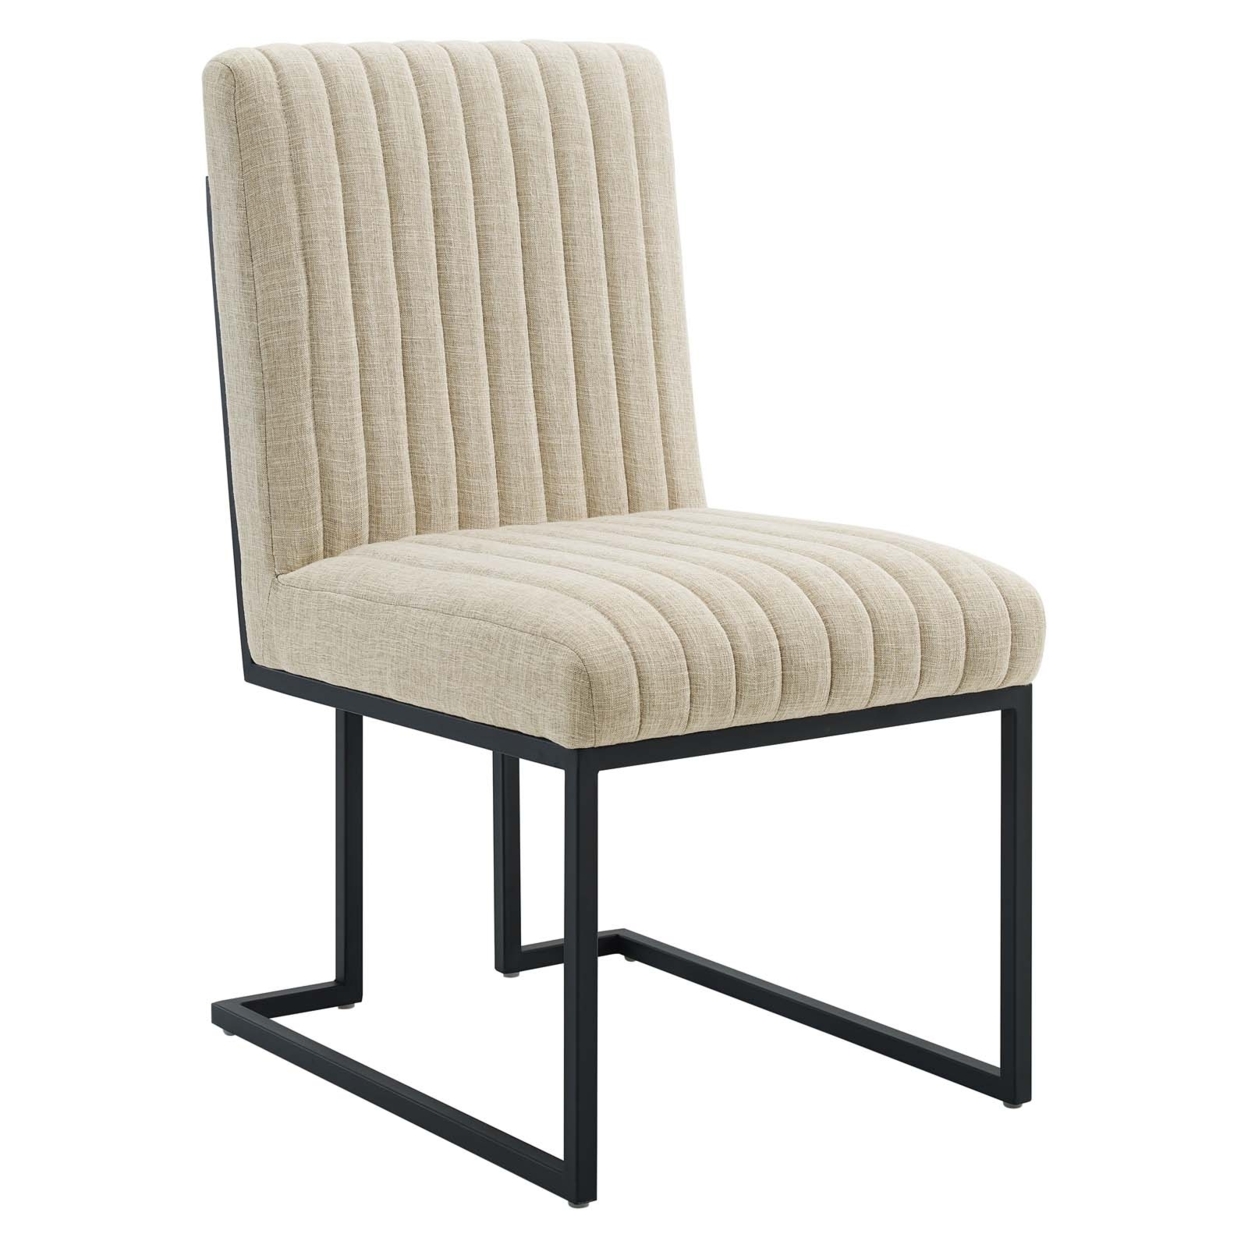 Indulge Channel Tufted Fabric Dining Chair, Beige